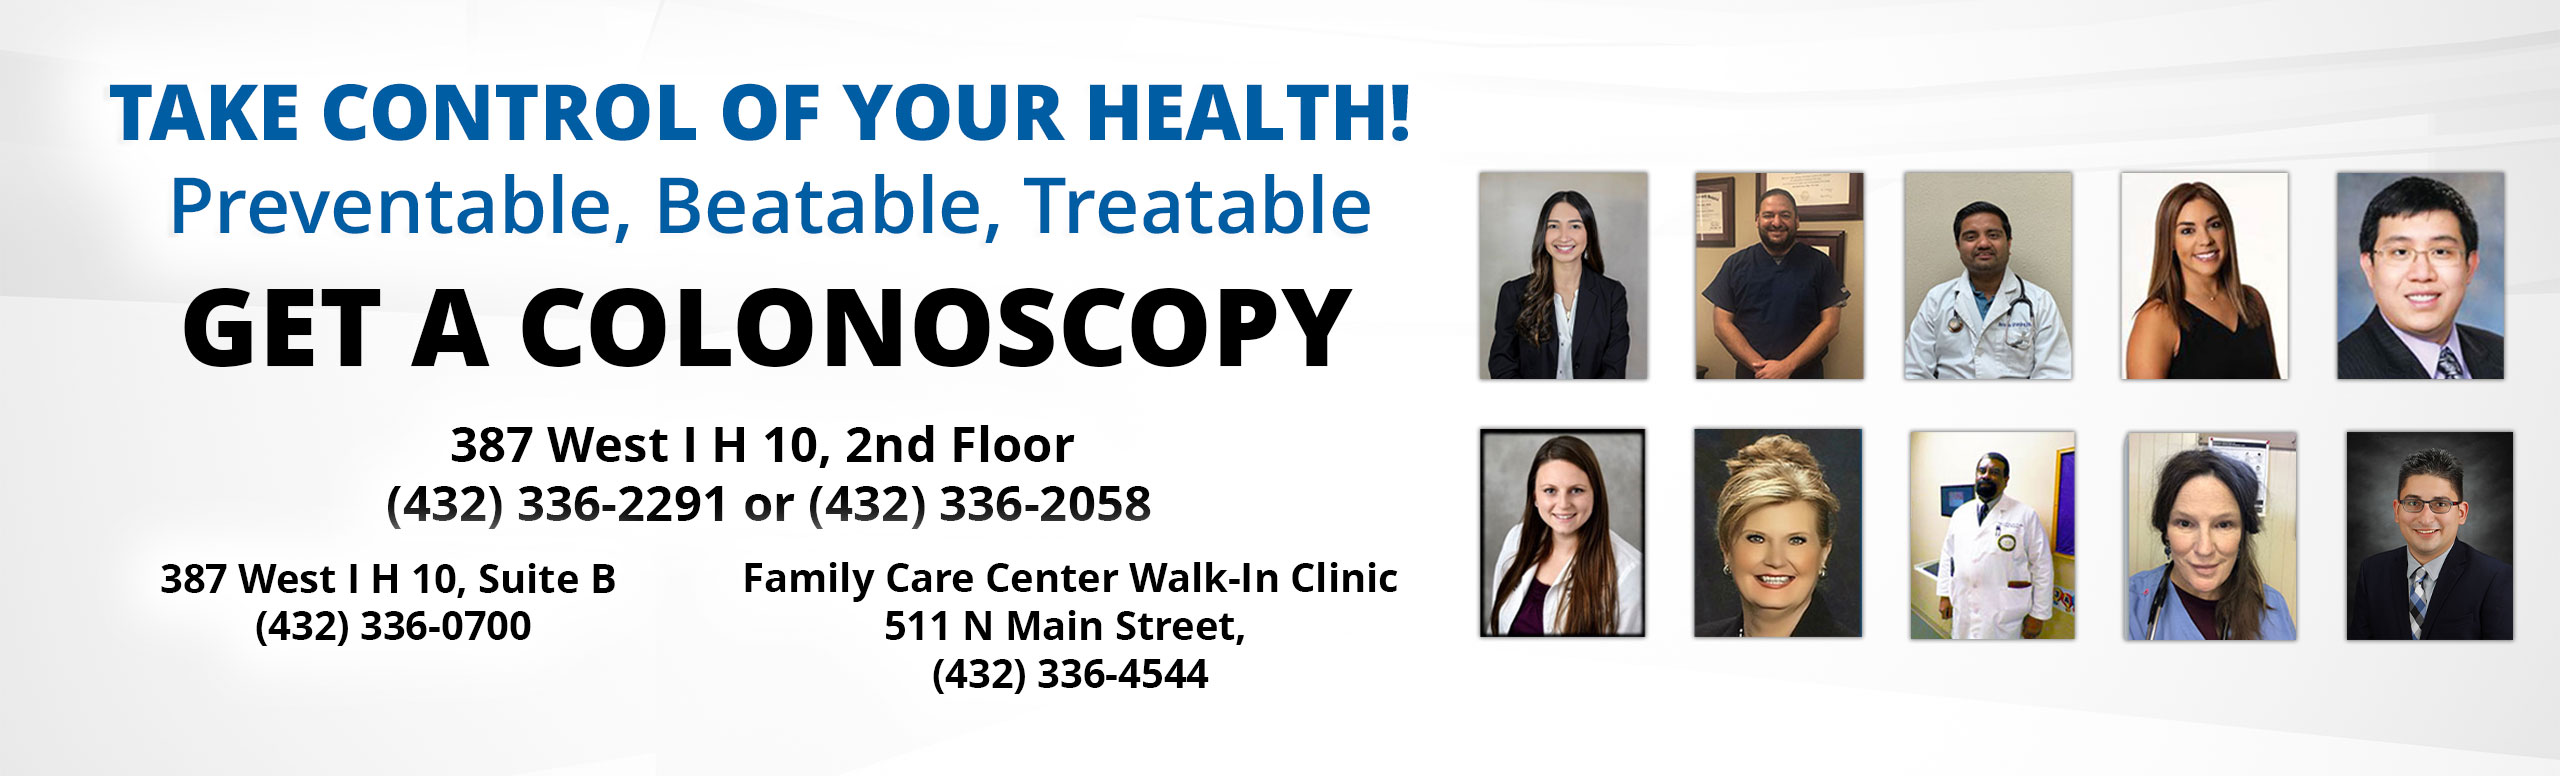 Take Control of your Health! 

Preventable, Beatable, Treatable
Get a Colonscopy

387 West I H 10, 2nd Floor
(432) 336-2291 or (432) 336-2058